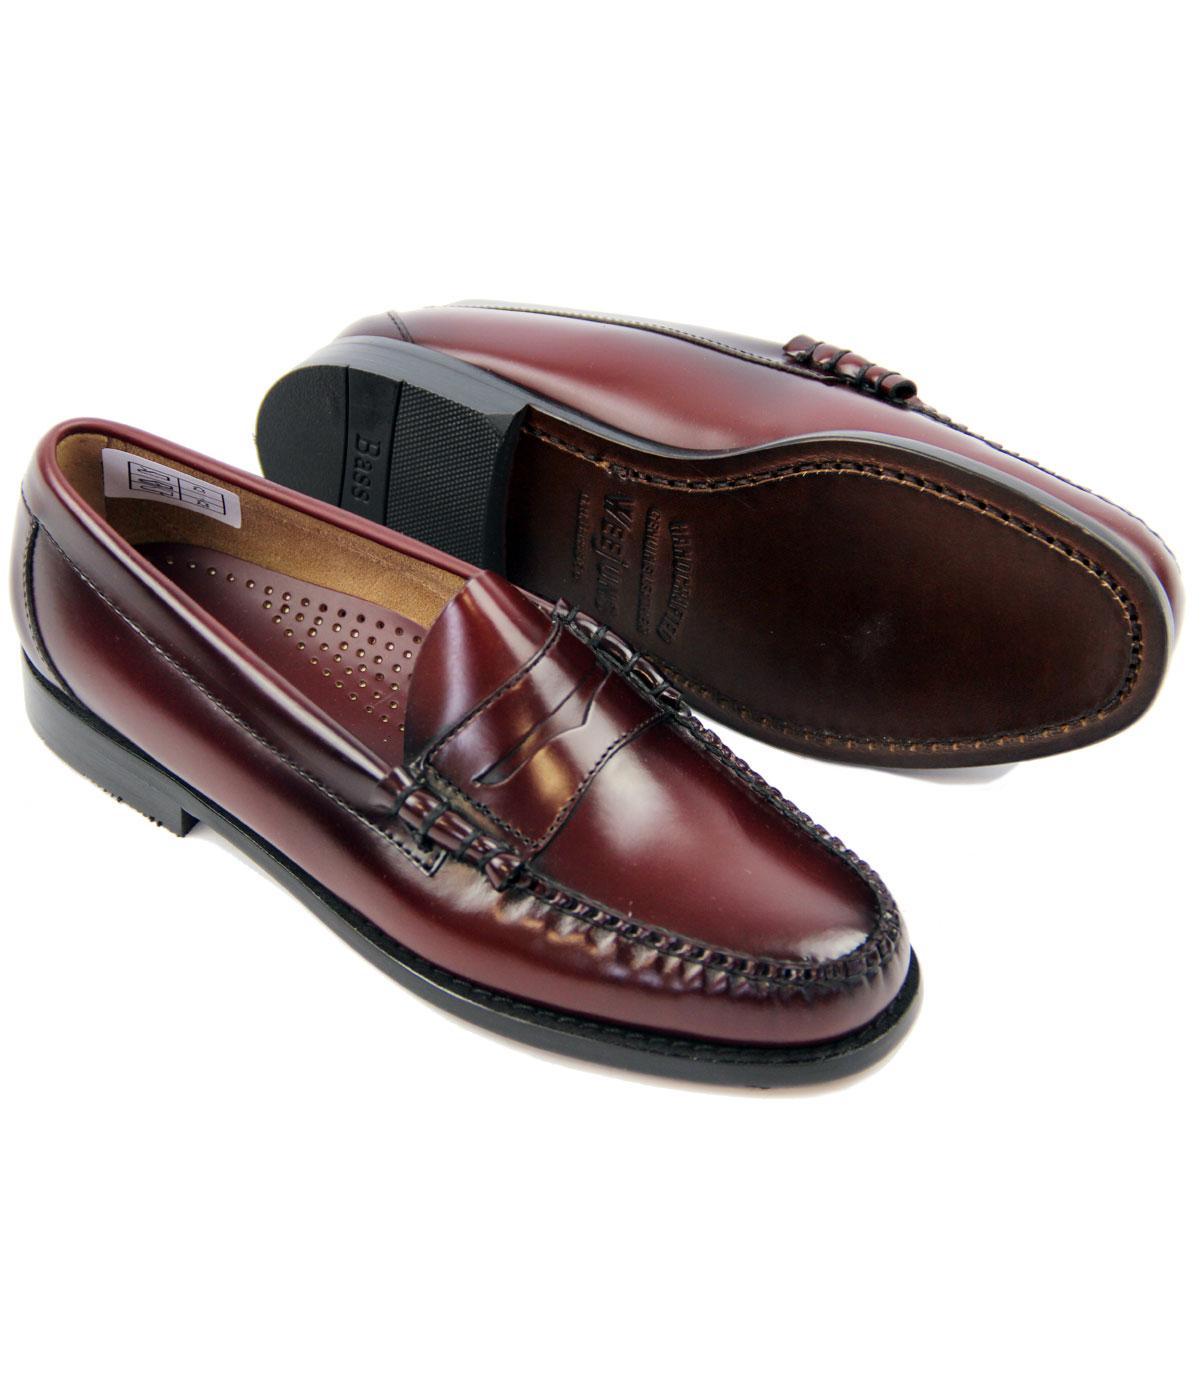 BASS WEEJUNS Larson Retro Mod Penny Loafer Shoes in Wine Leather